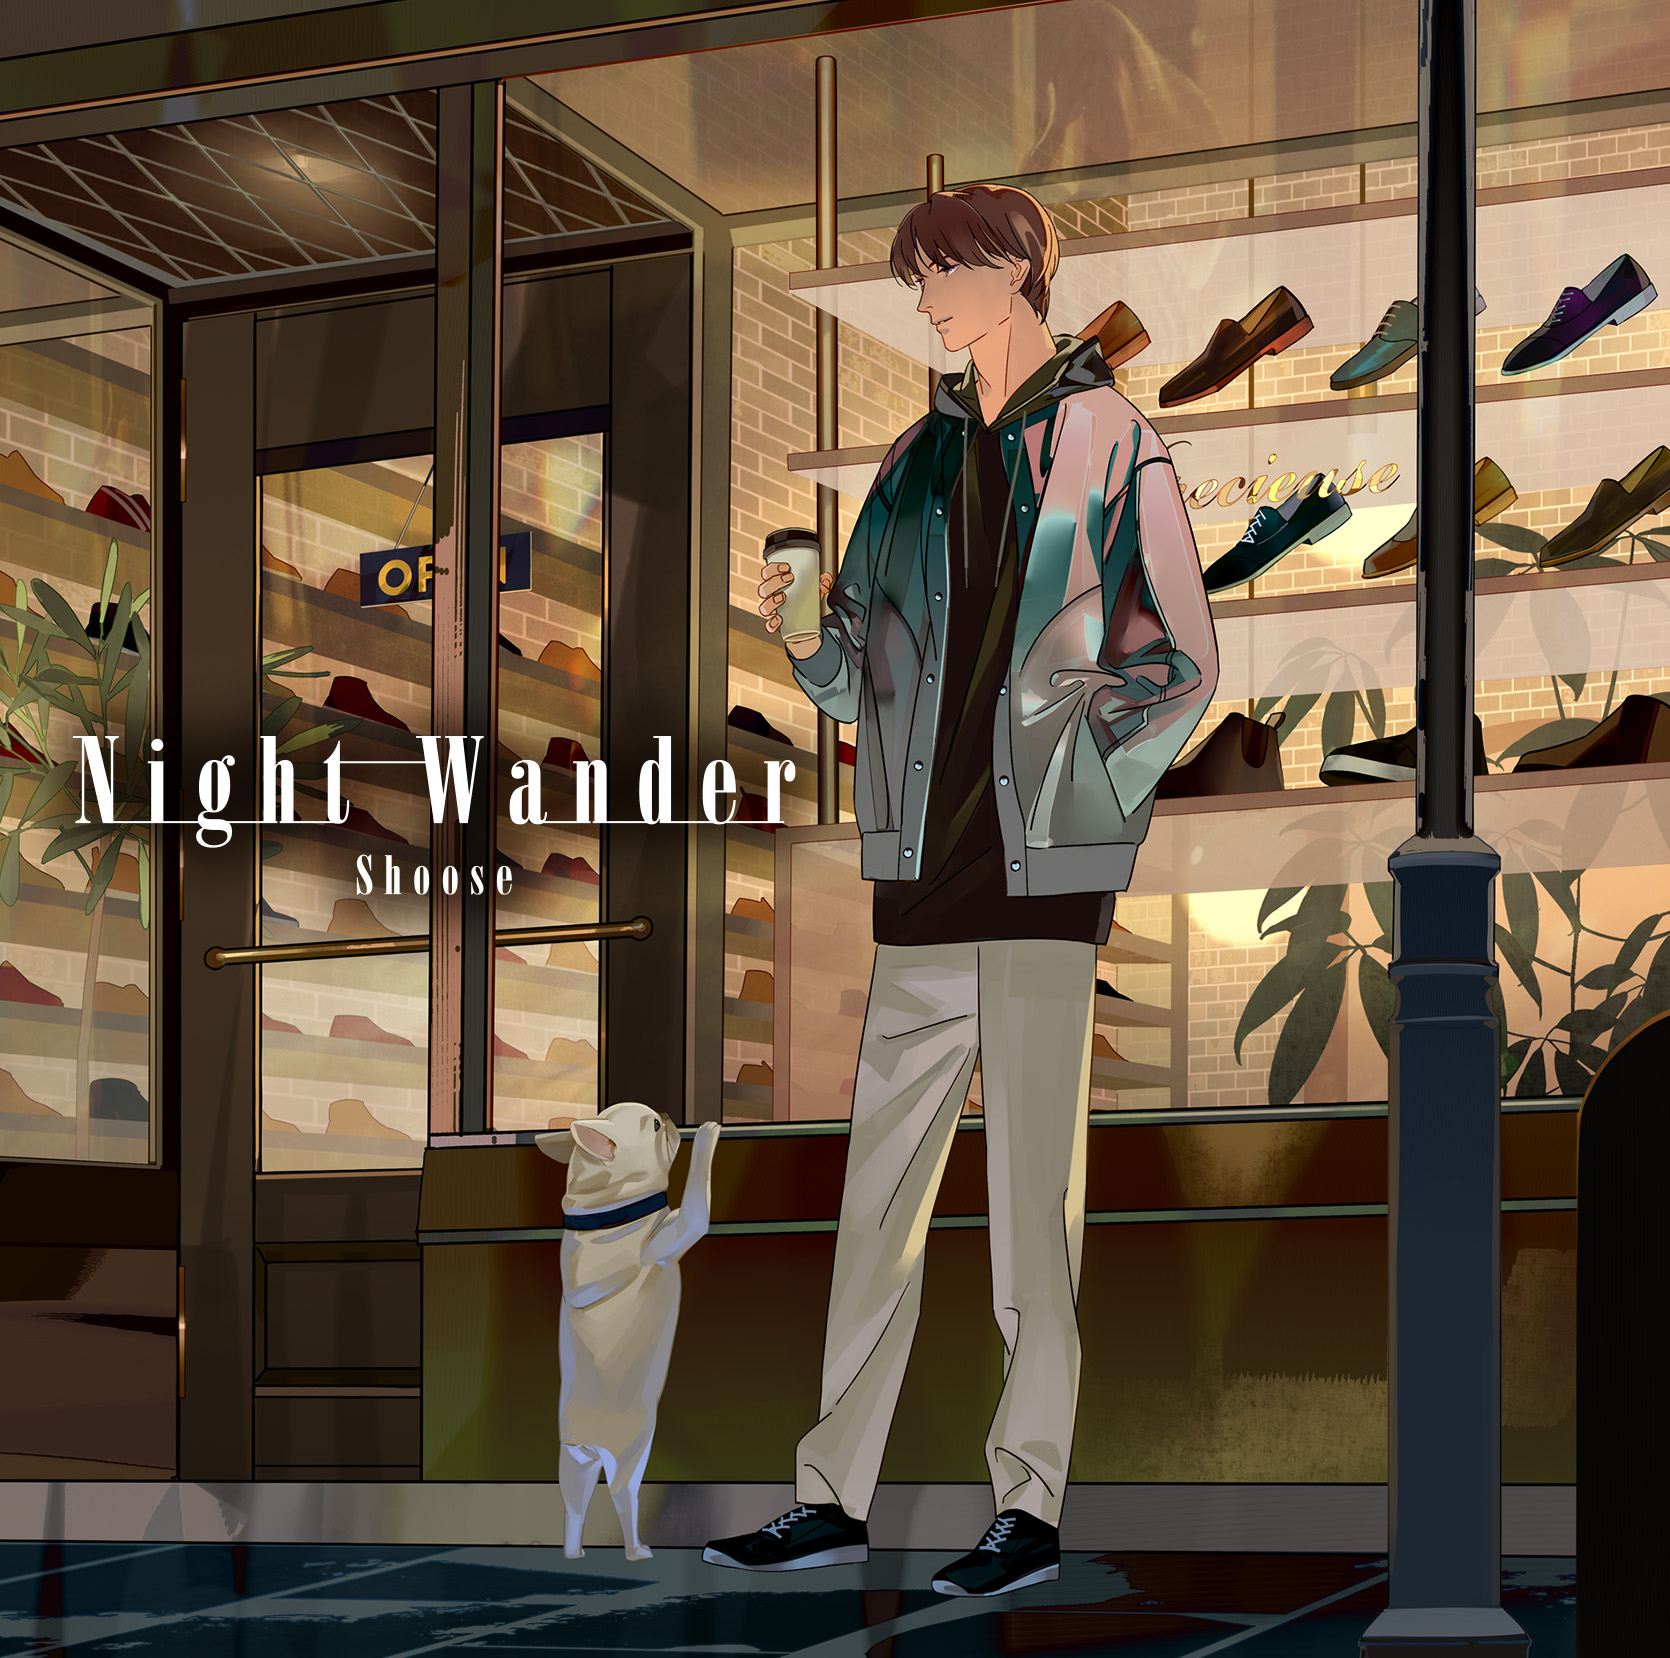 Shoose "Night Wander" Normal Version(CD Only)Release on January 5th 2022